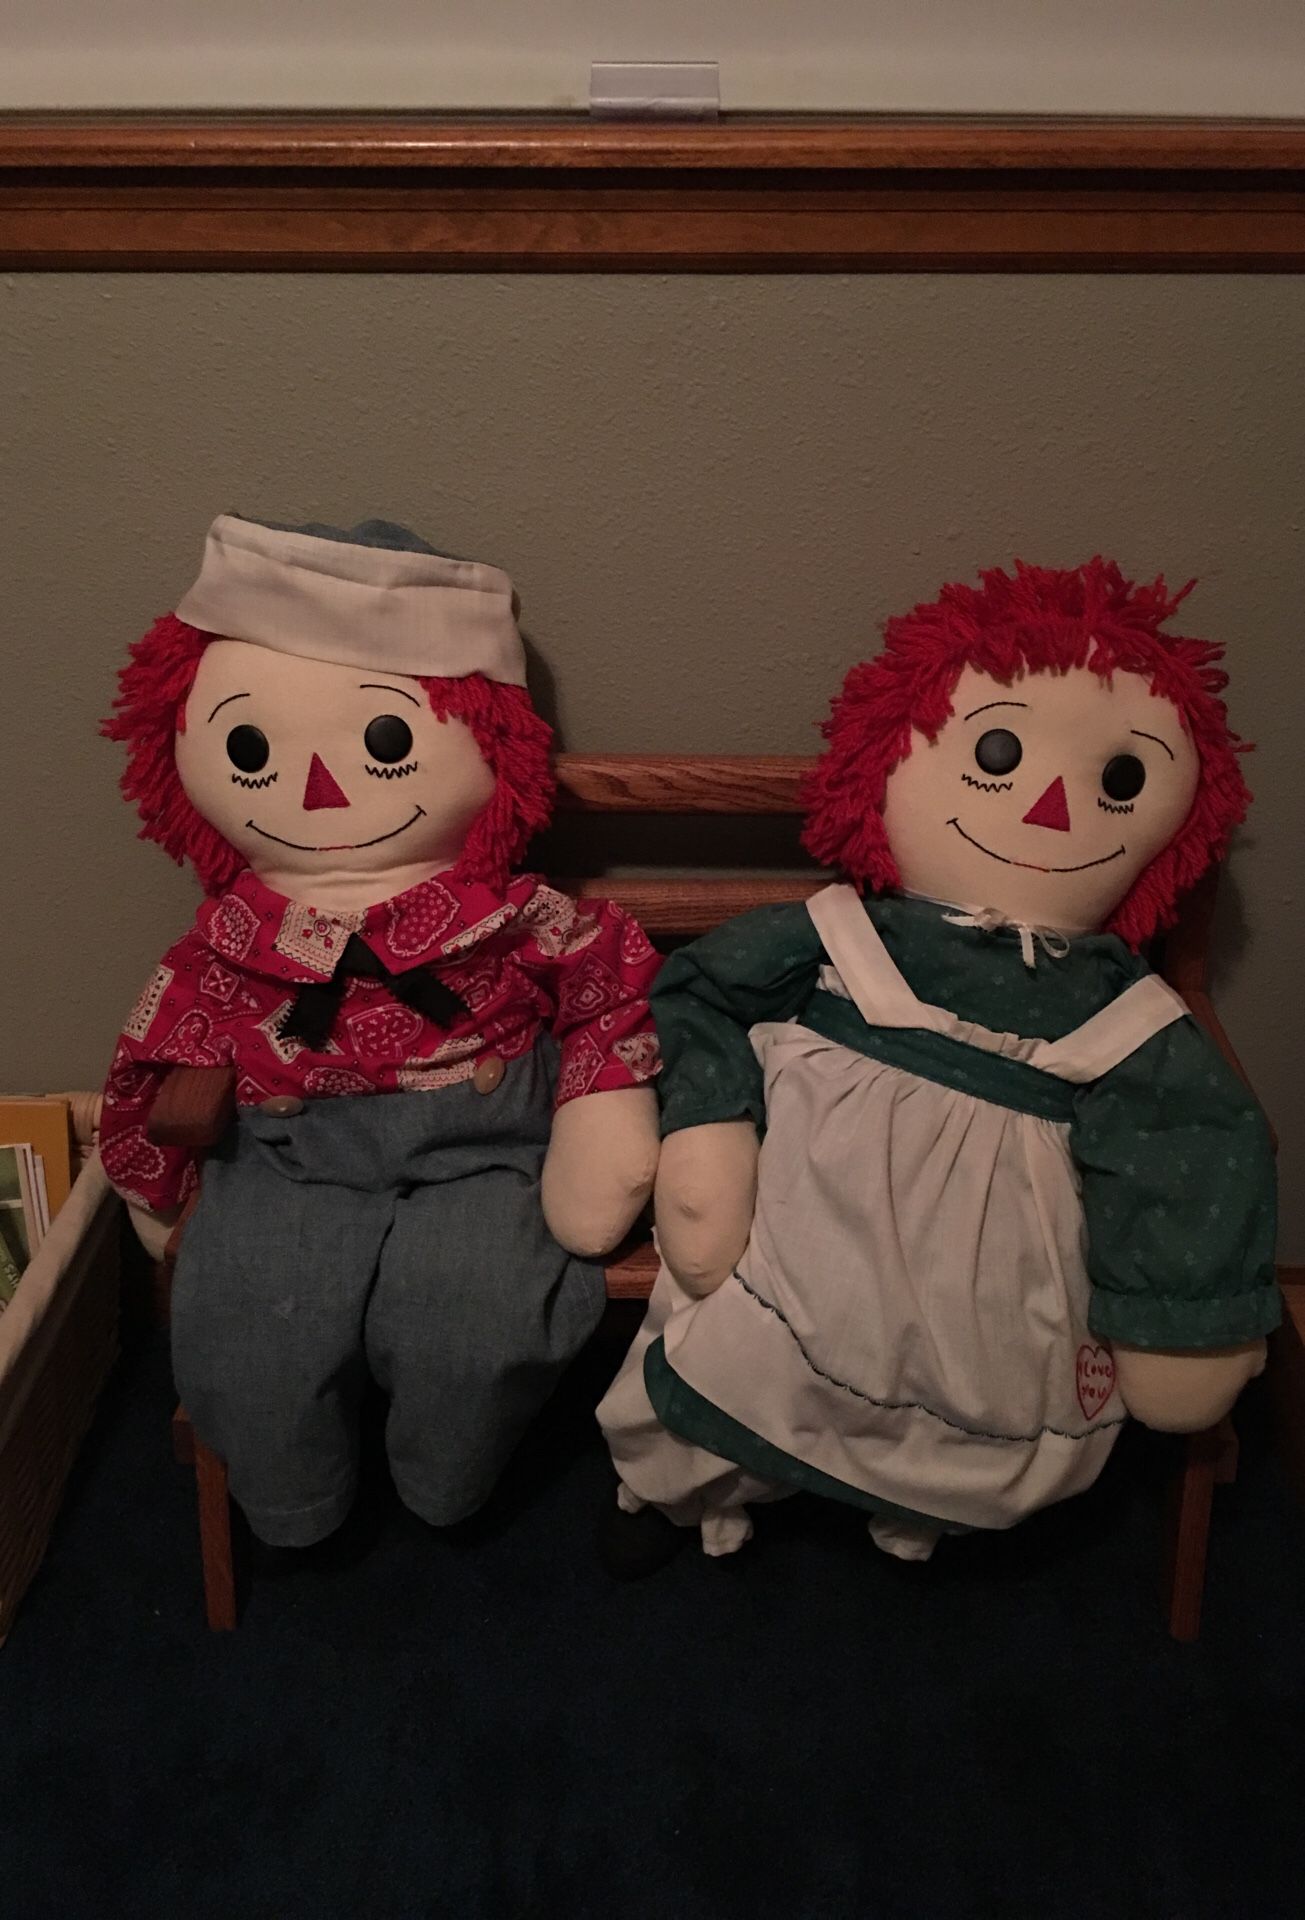 36” handmade raggedy Ann and Andy.Never played with. Wooden bench included.